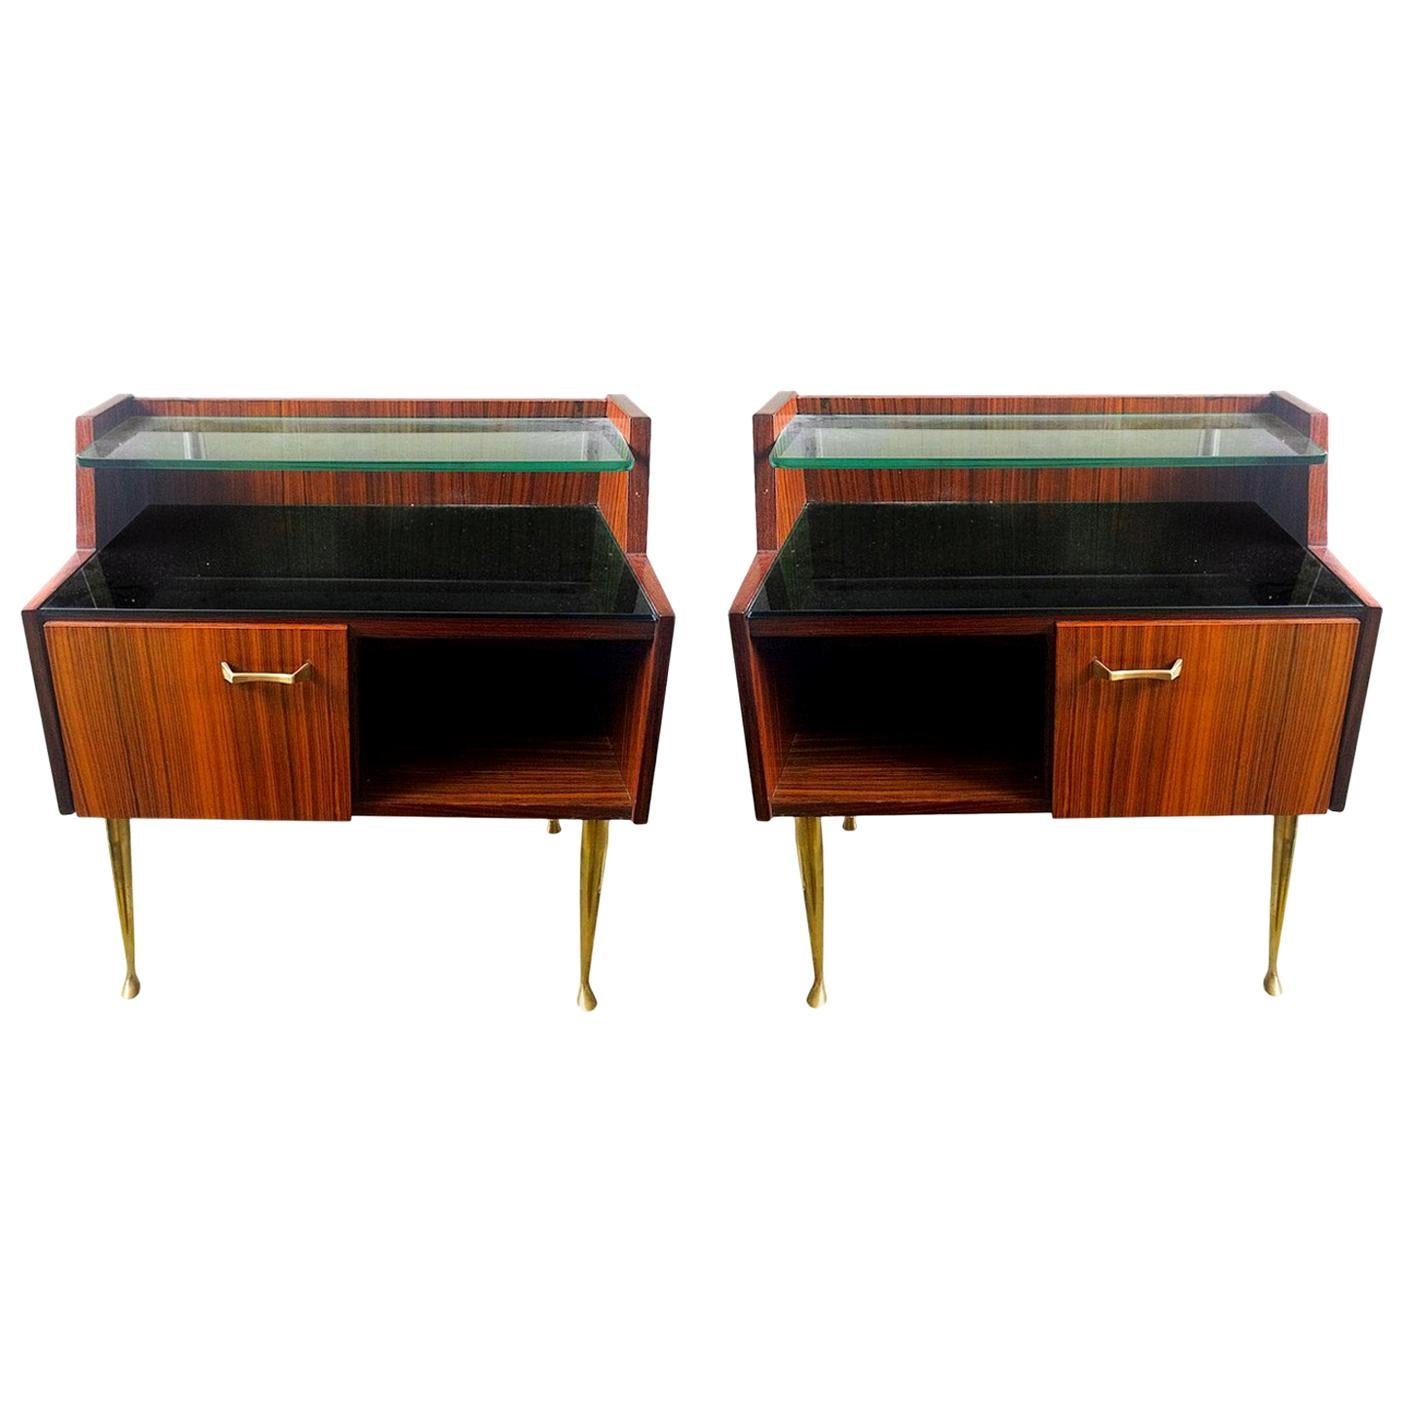 Pair of Italian Bedside Rosewood, glass and Brass Cabinets, Mid-Century Modern